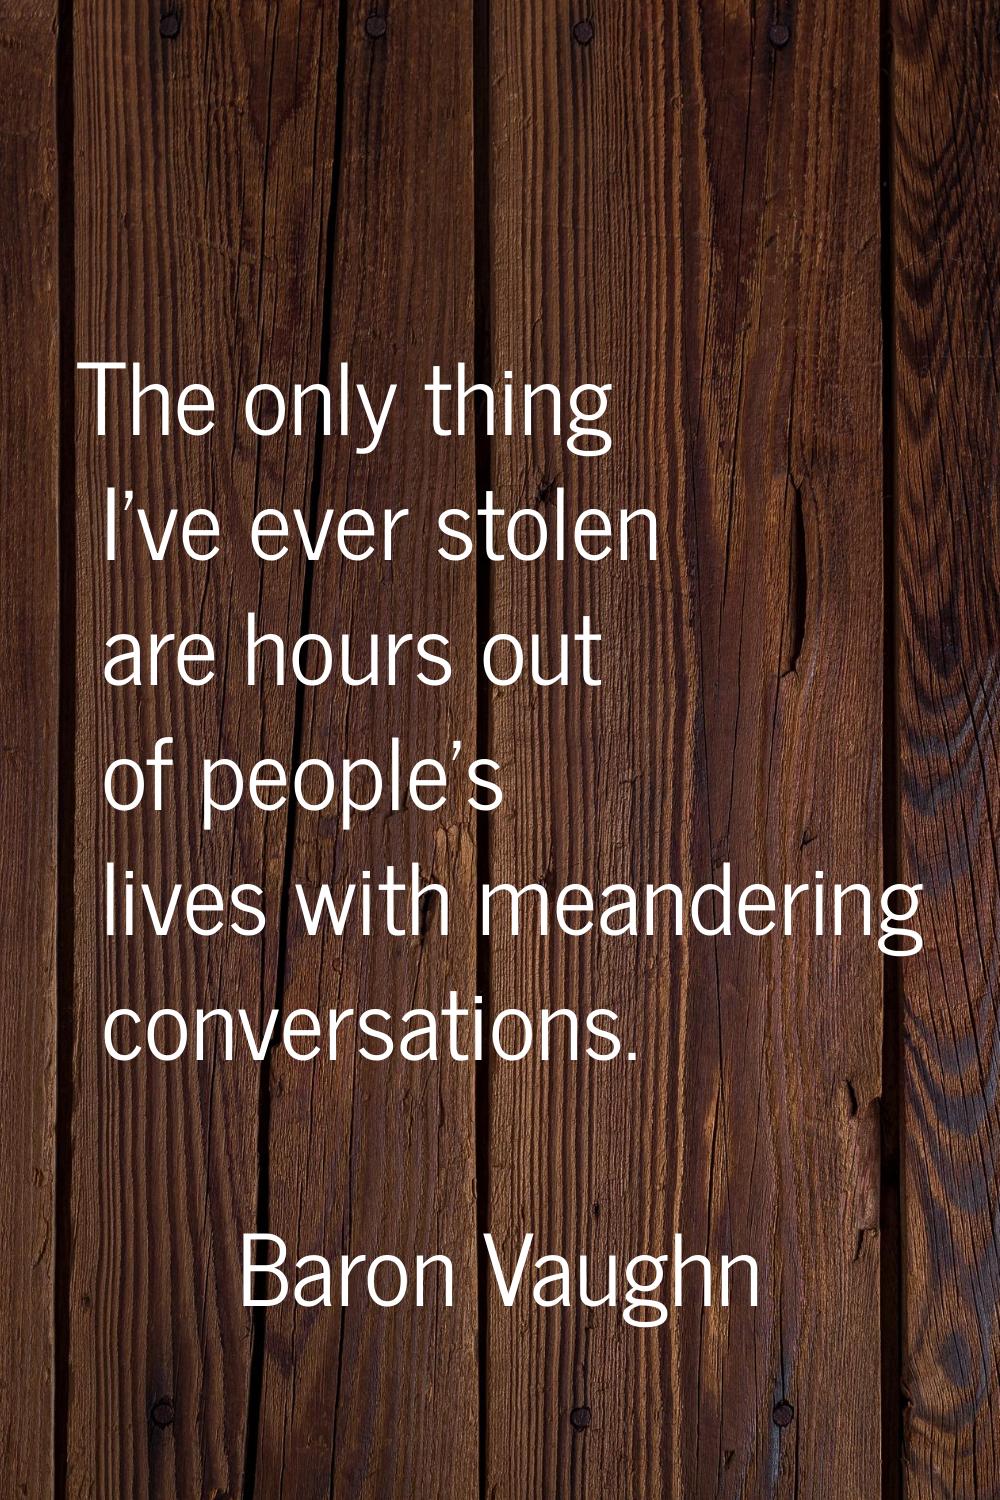 The only thing I've ever stolen are hours out of people's lives with meandering conversations.